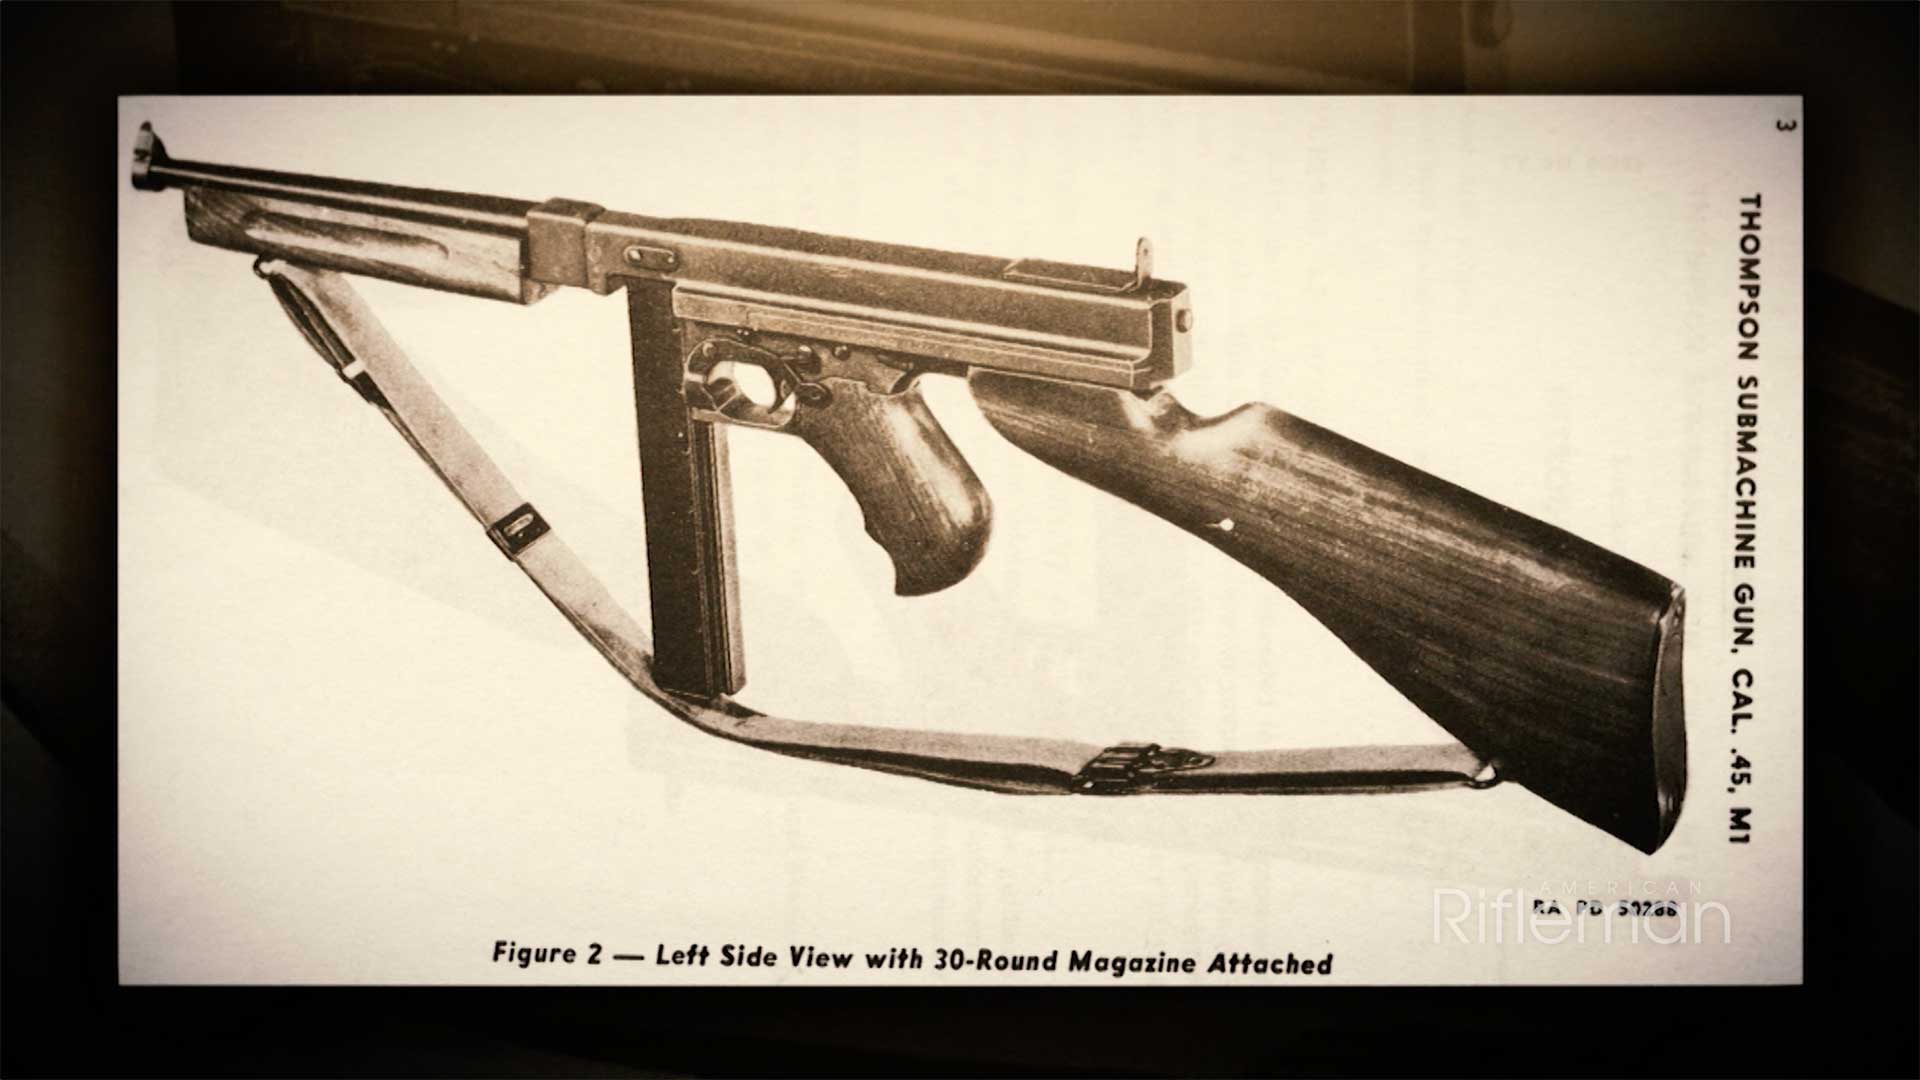 Left side of the M1 Thompson submachine gun shown with a 30-round magazine.